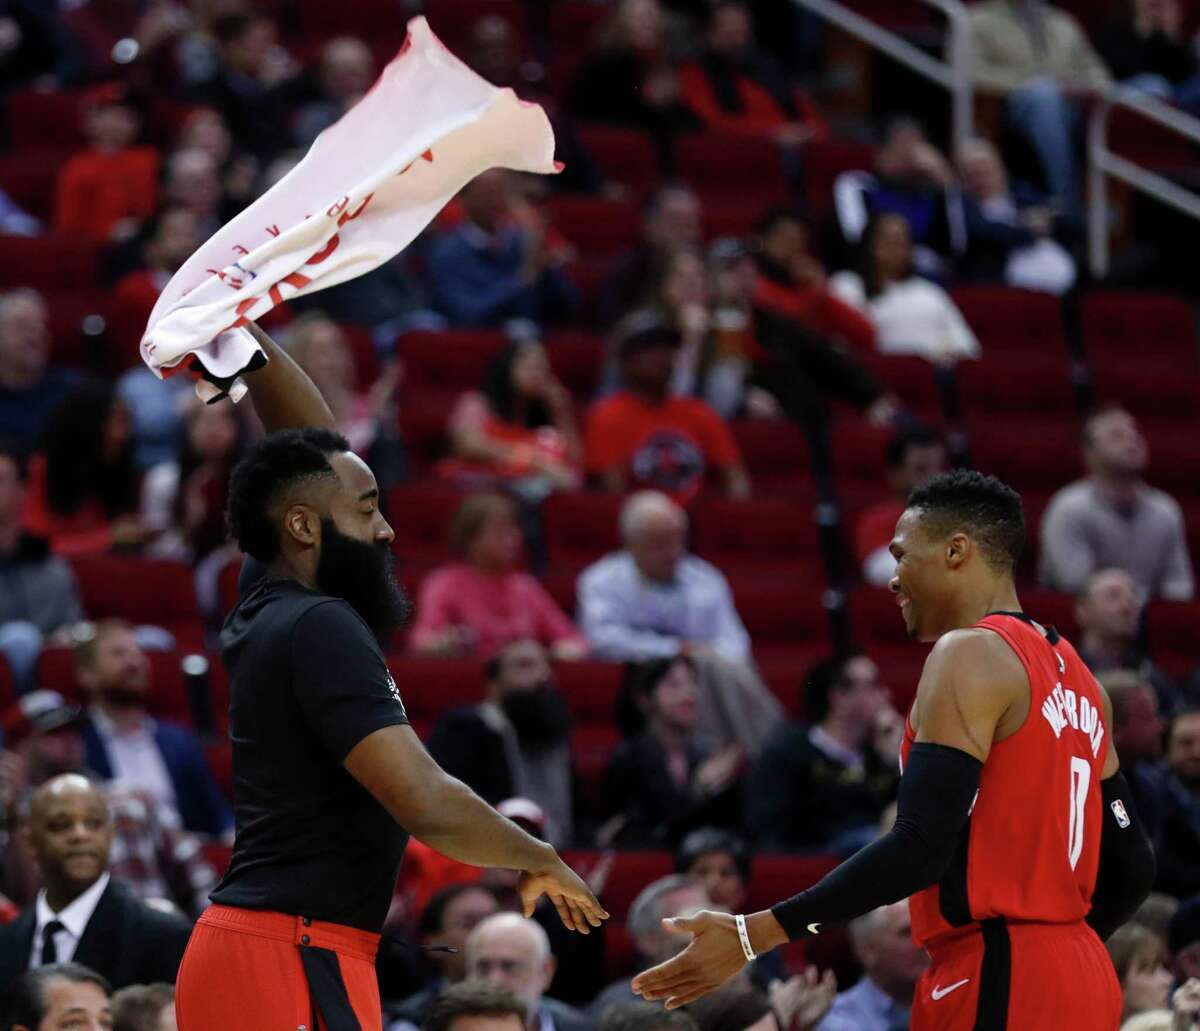 The Rockets are not quite ready to throw in the towel on James Harden and Russell Westbrook as the trade and free agency season begins.